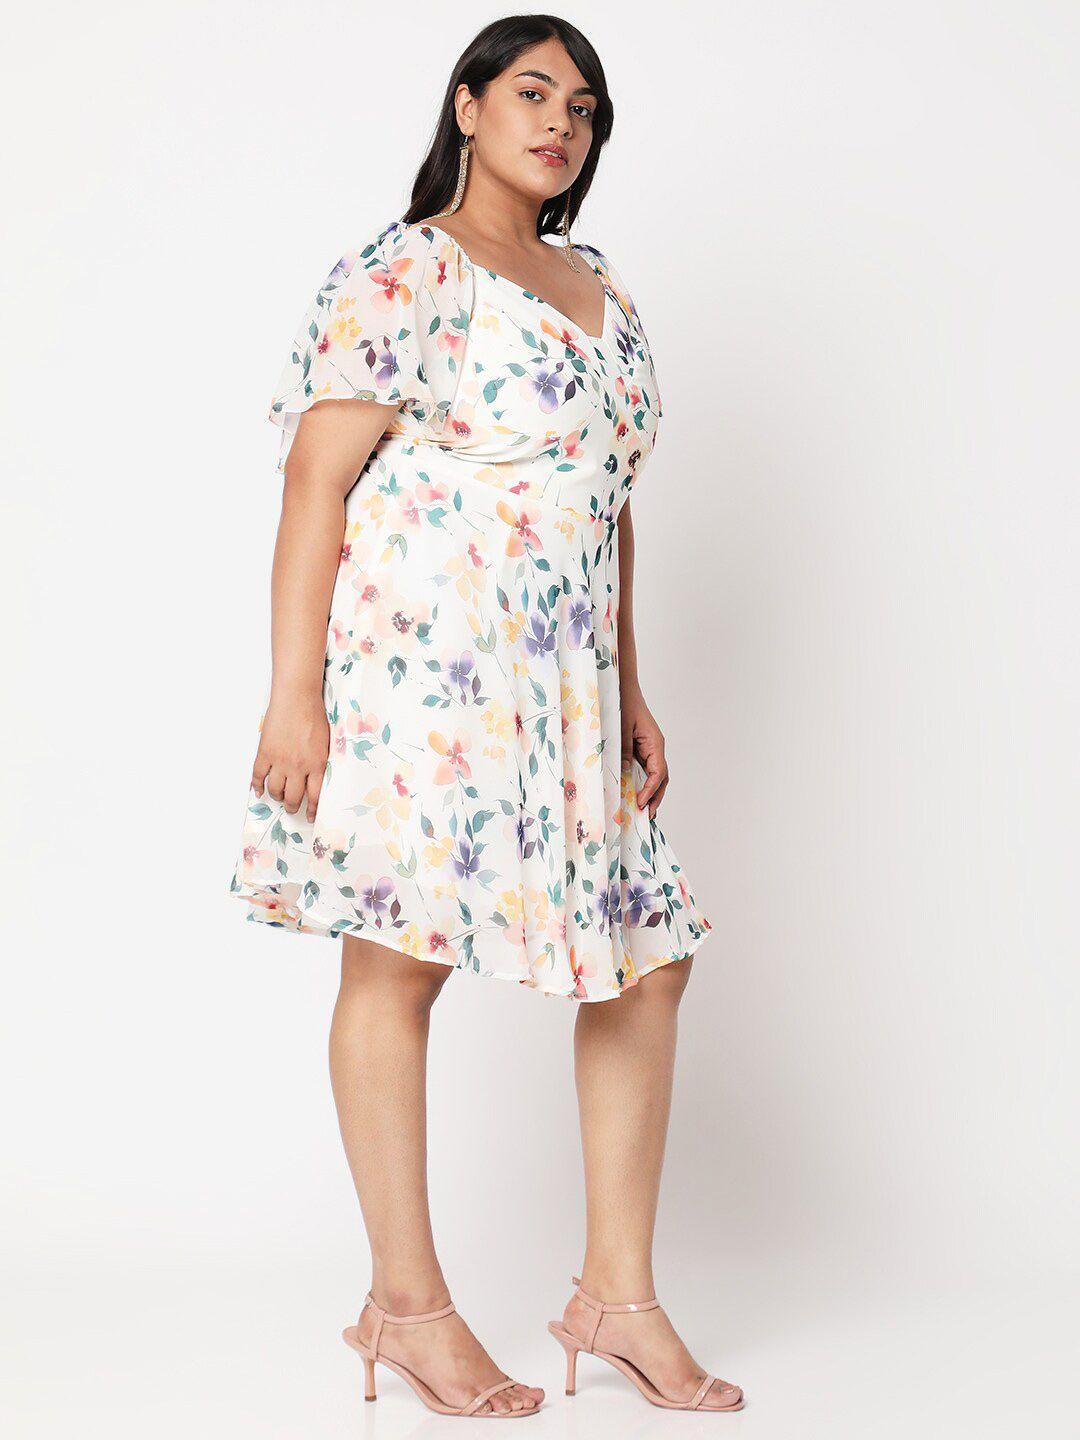 curves by mish white plus size floral printed georgette dress